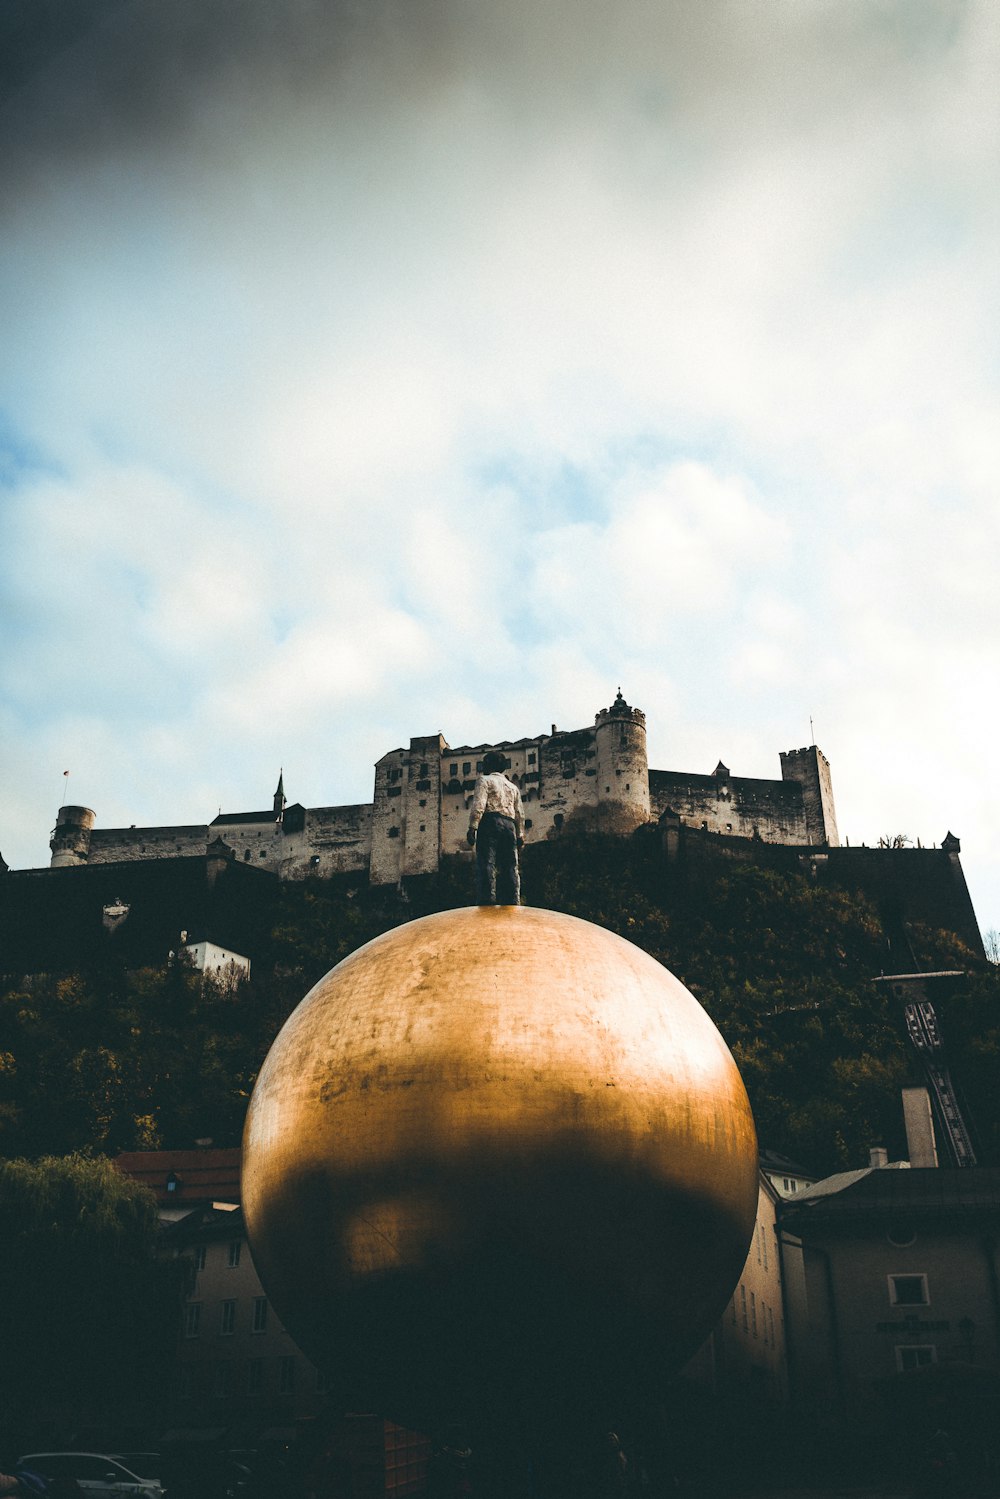 unknown person standing on gold-colored ball statue